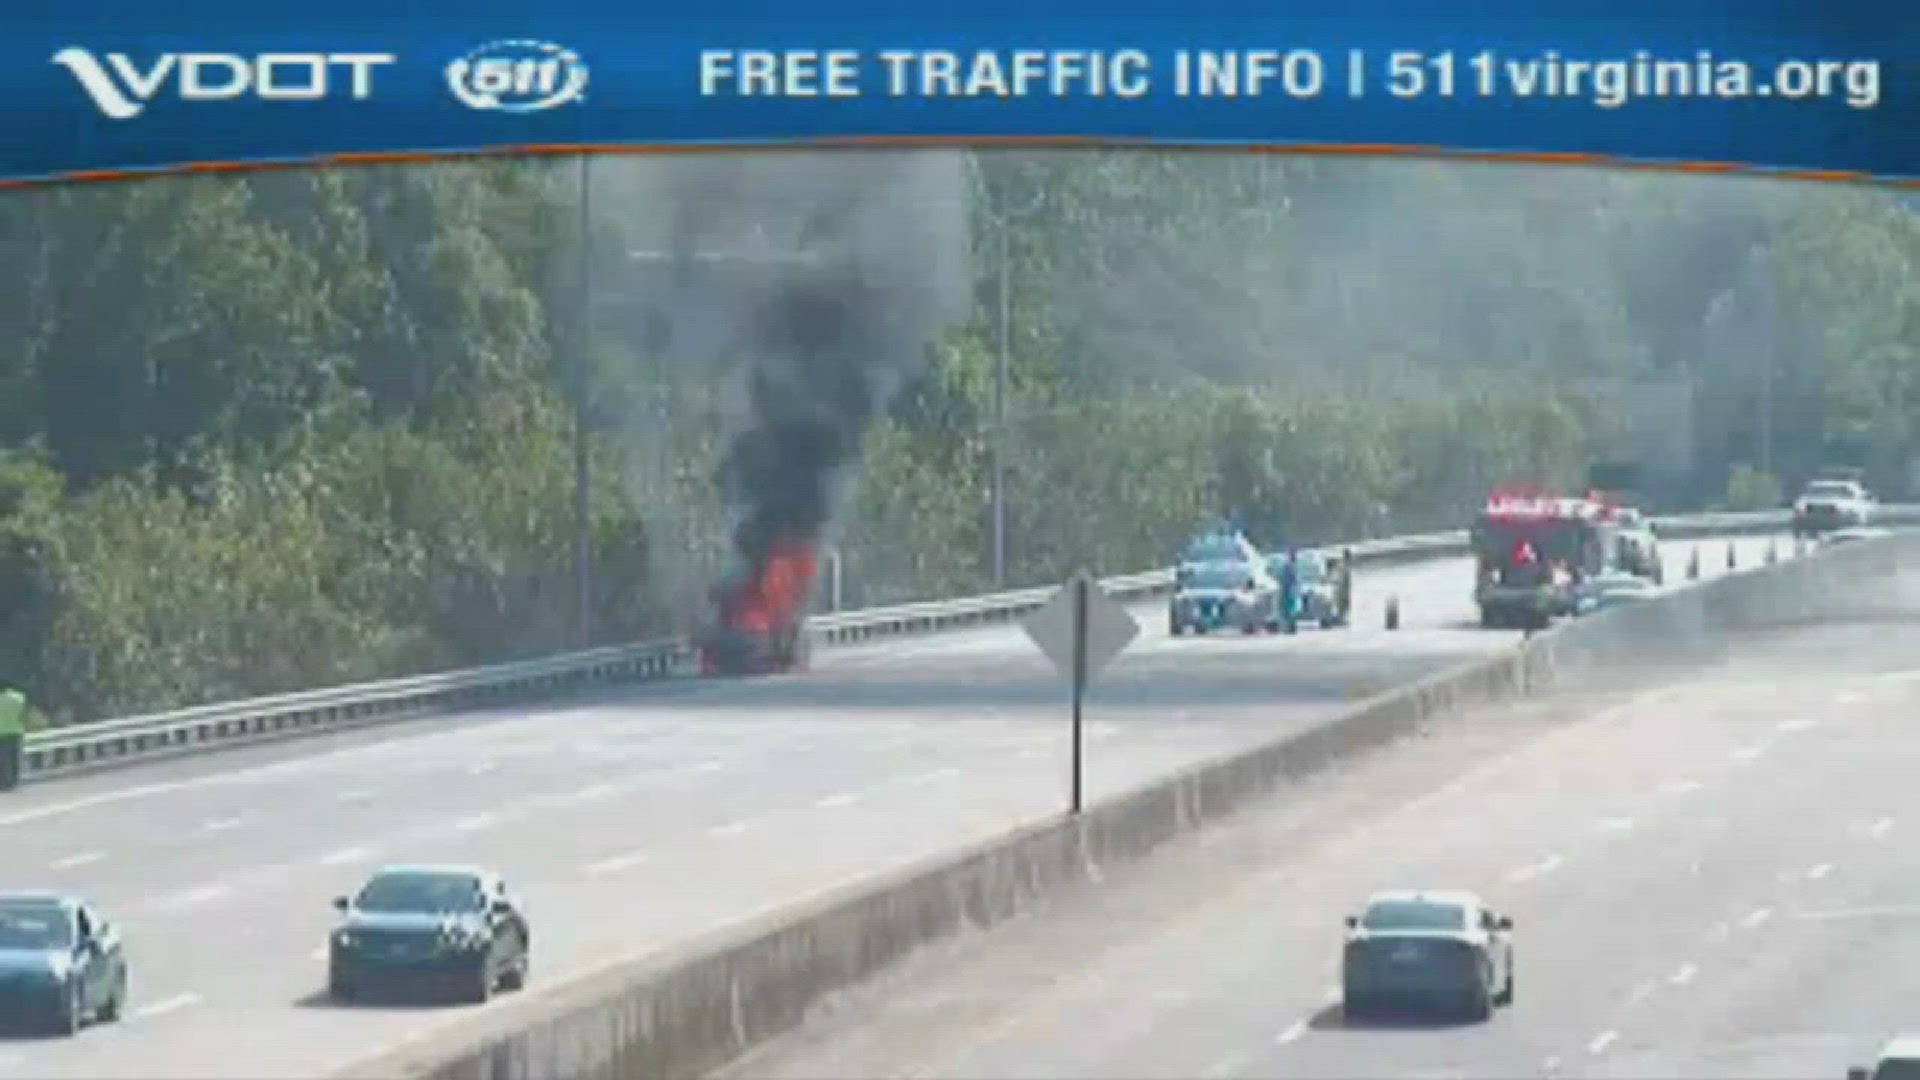 5/27/17: A car was engulfed in flames on I-264 East in Virginia Beach on Saturday afternoon. Video courtesy the Virginia Dept. of Transportation.